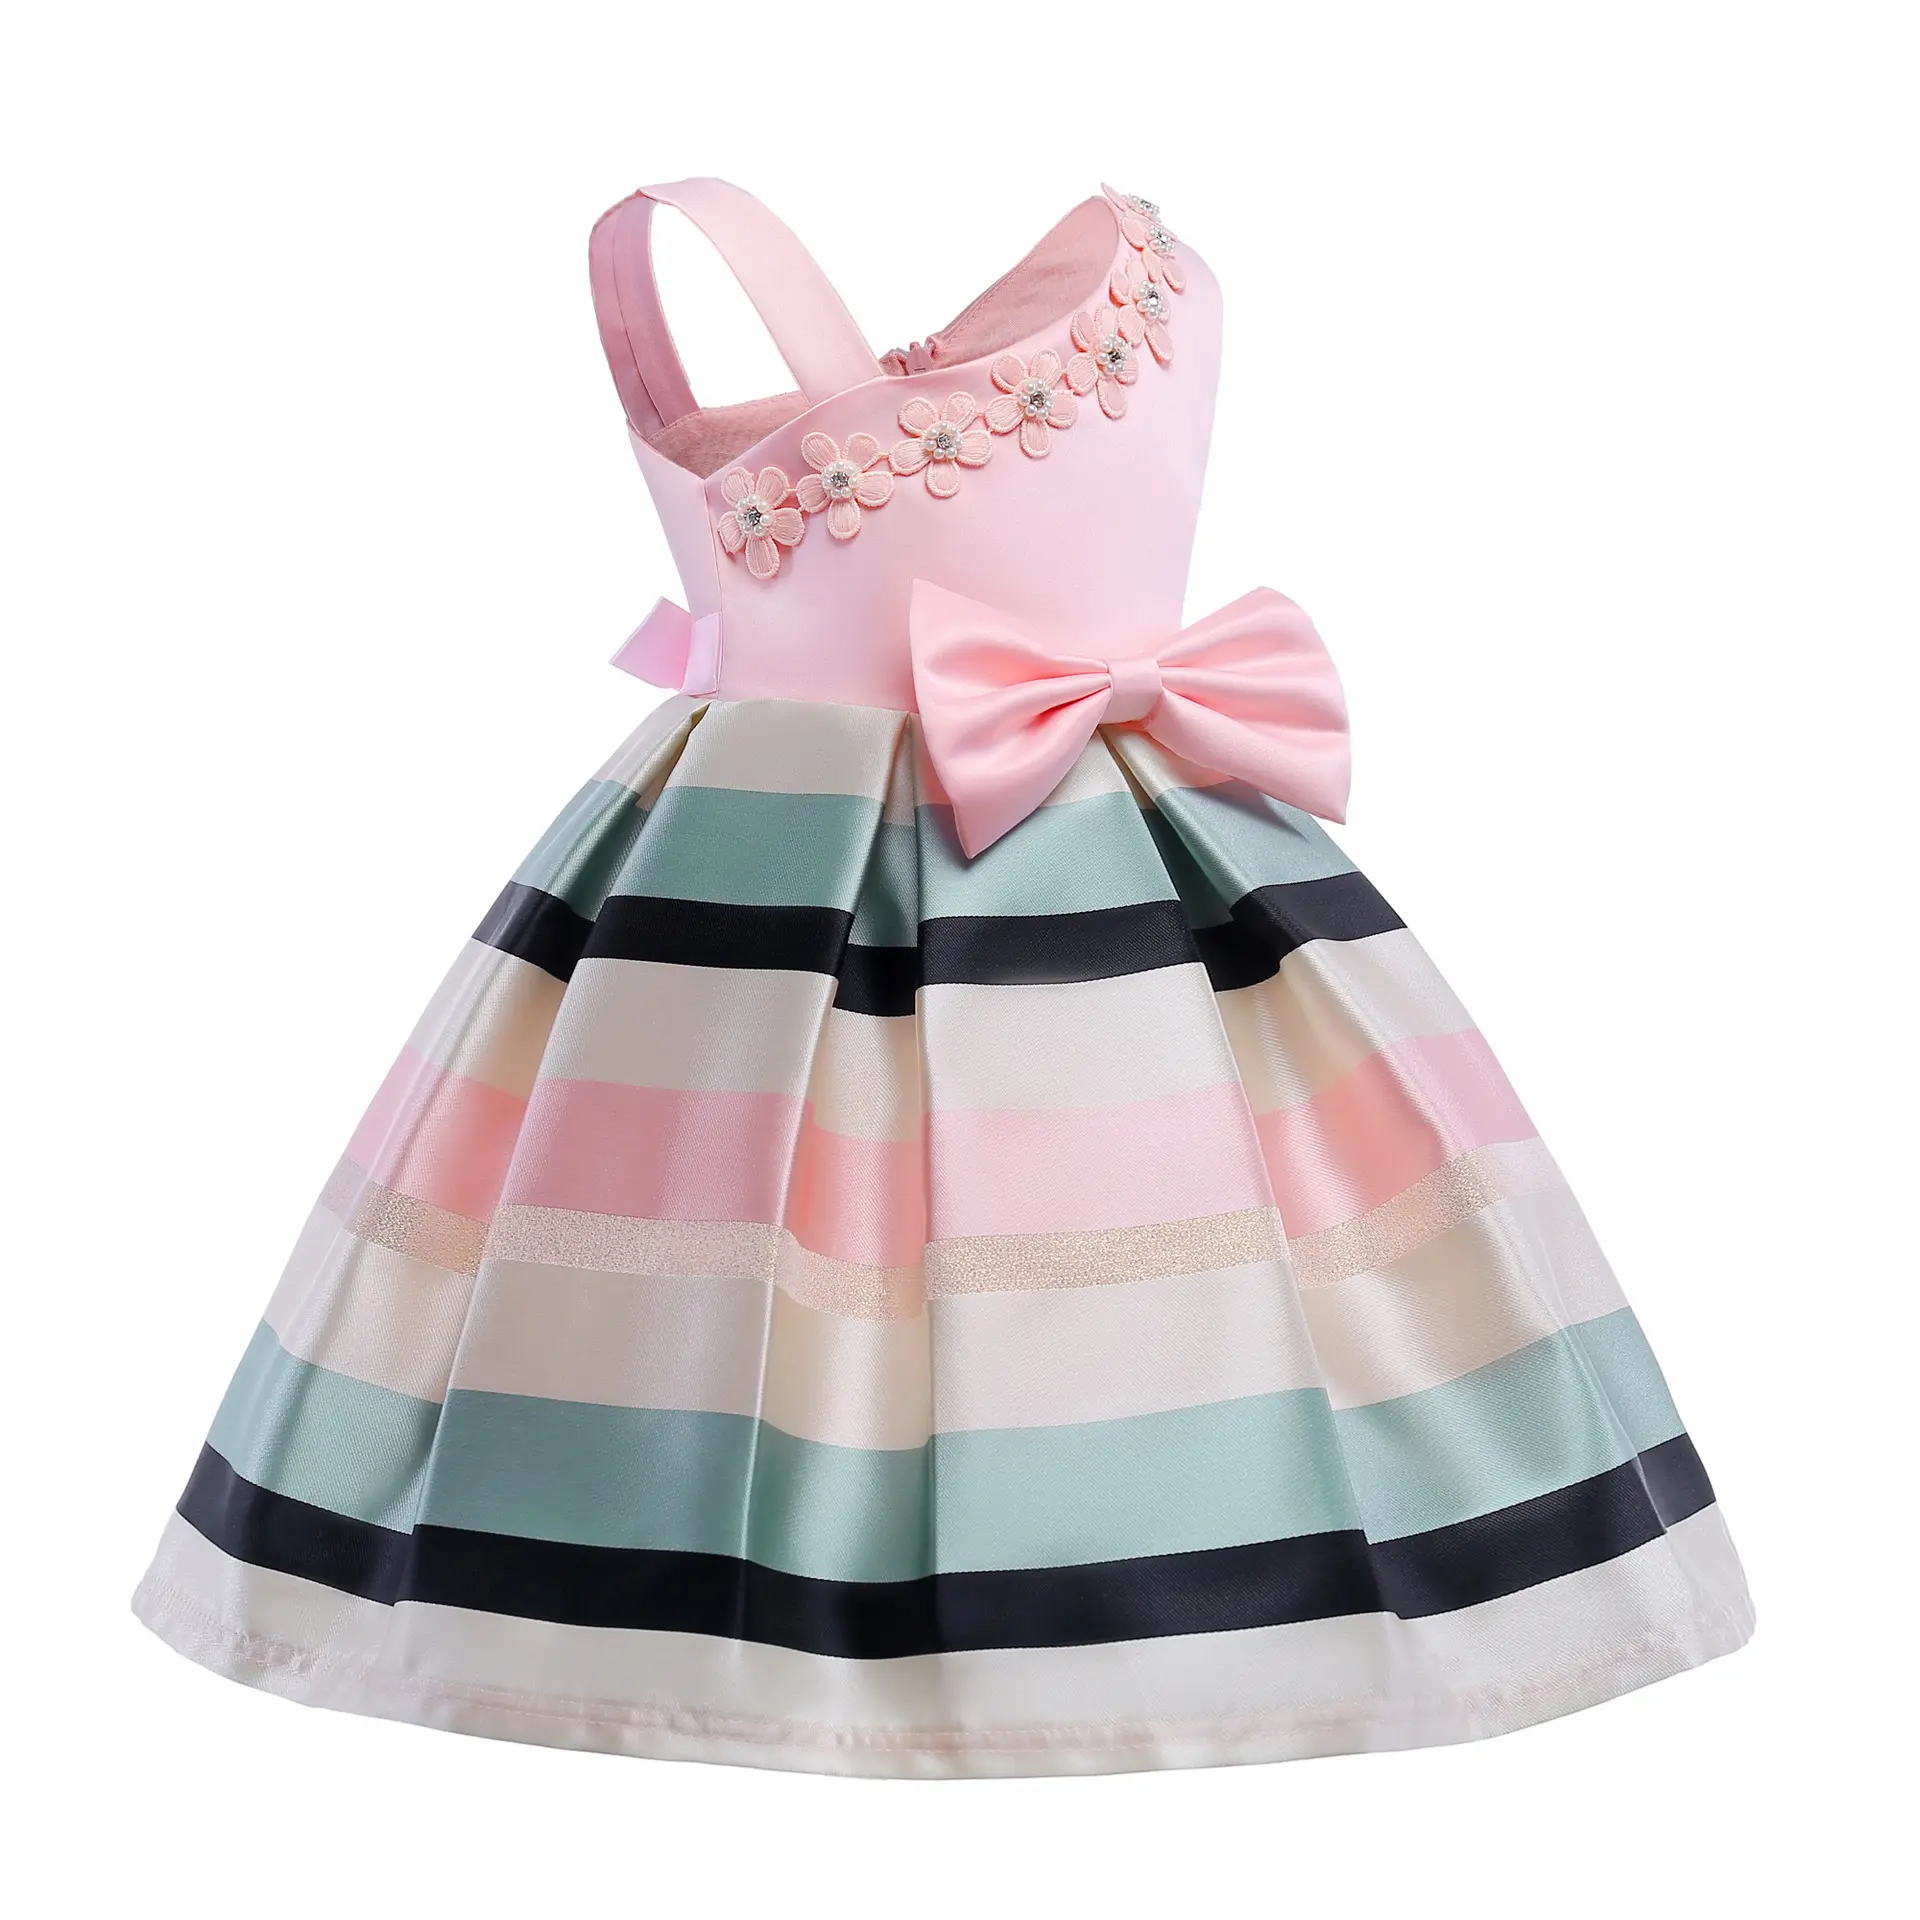 wholes princess dresses for girls party dress new kid Maxi toddler girls dresses